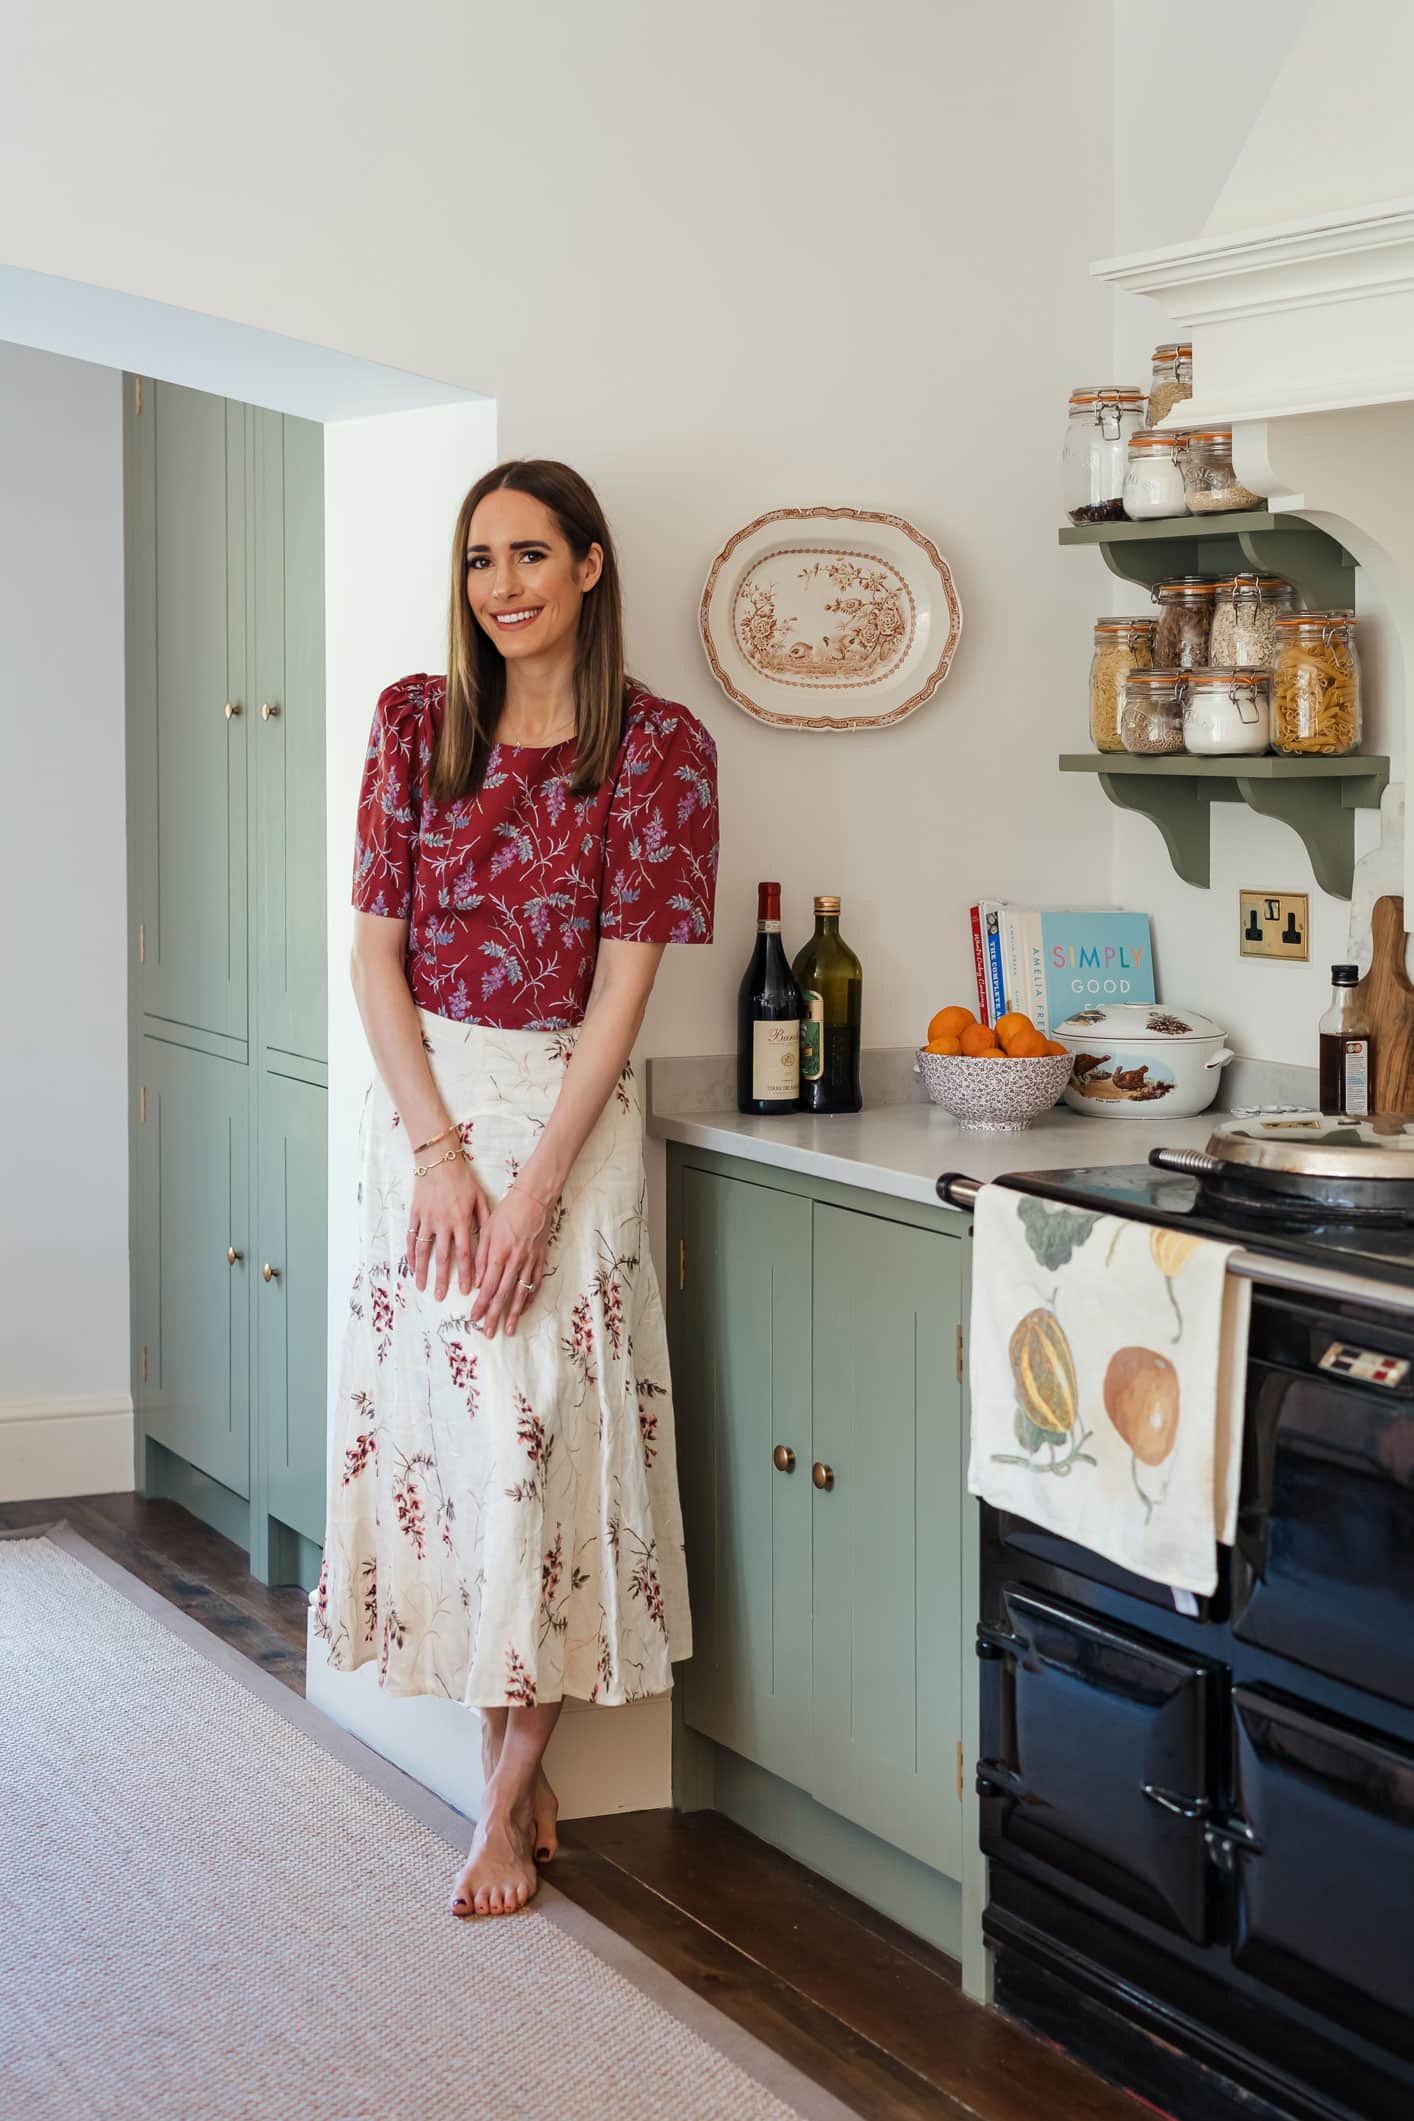 Louise Roe of Front Roe reveals her brand new kitchen